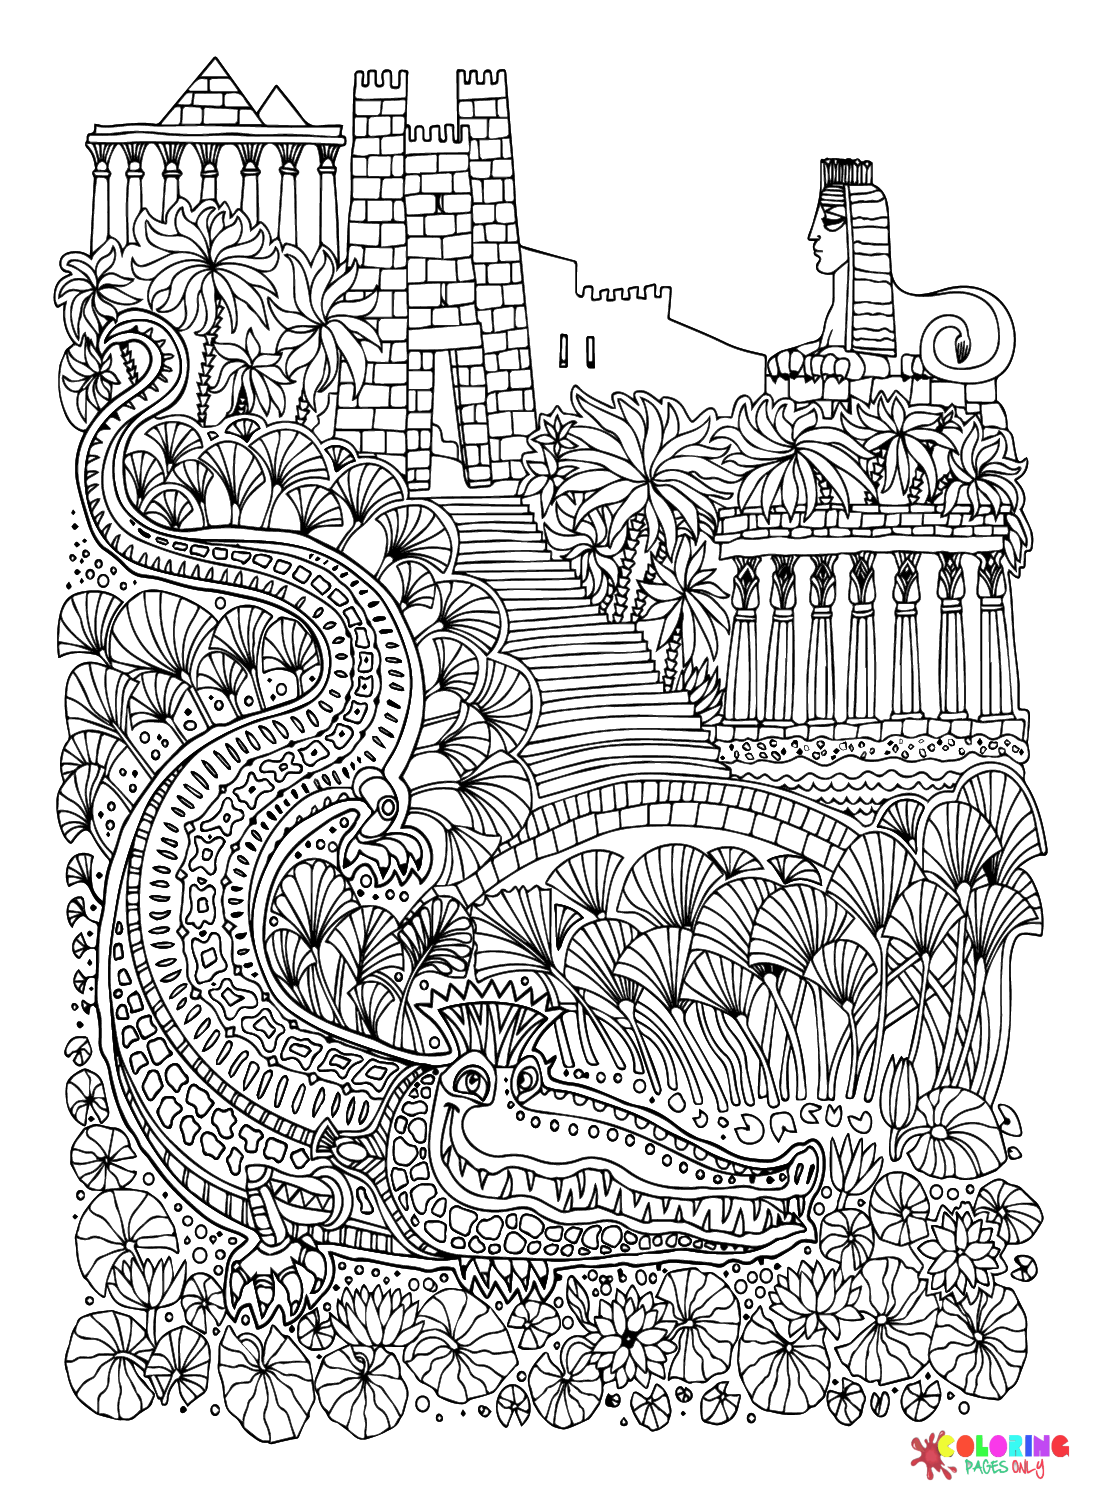 Ancient Egypt Art Coloring Page